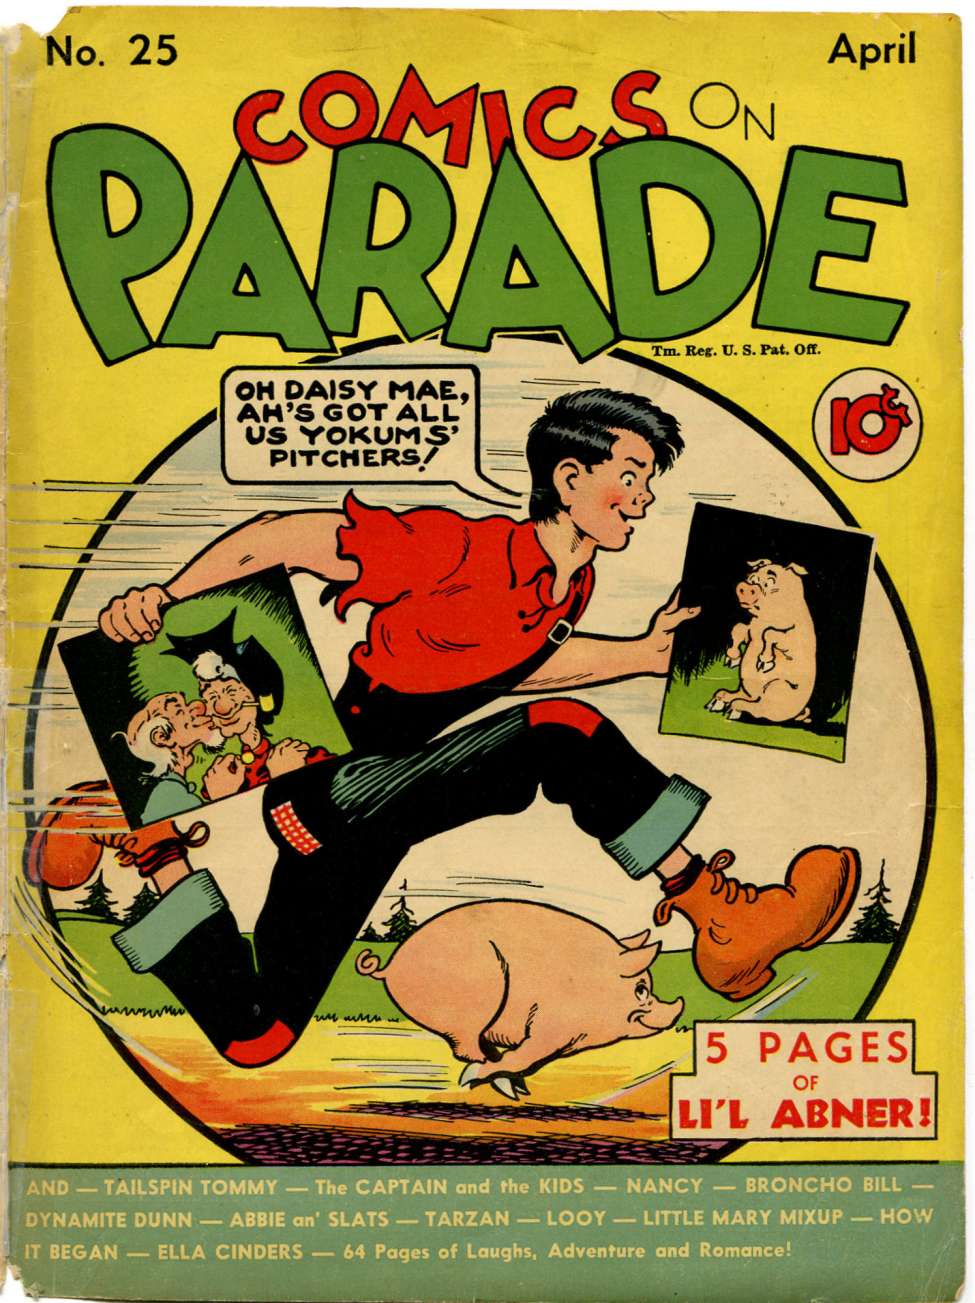 Book Cover For Comics on Parade 25